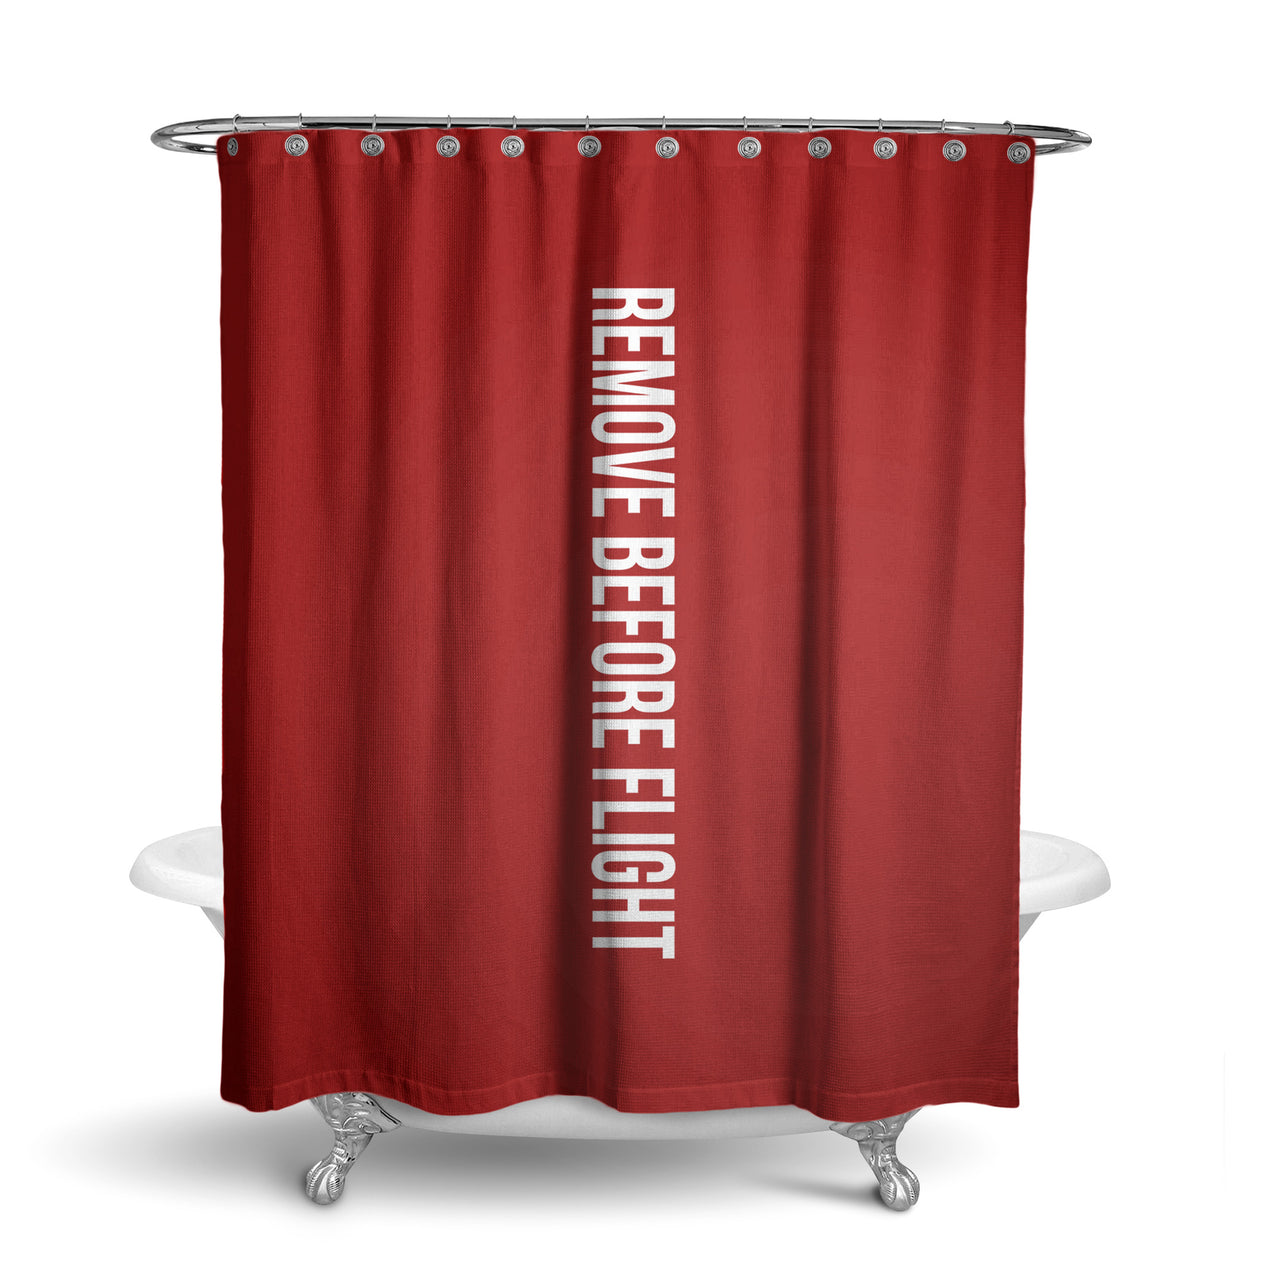 Remove Before Flight 2 Designed Shower Curtains